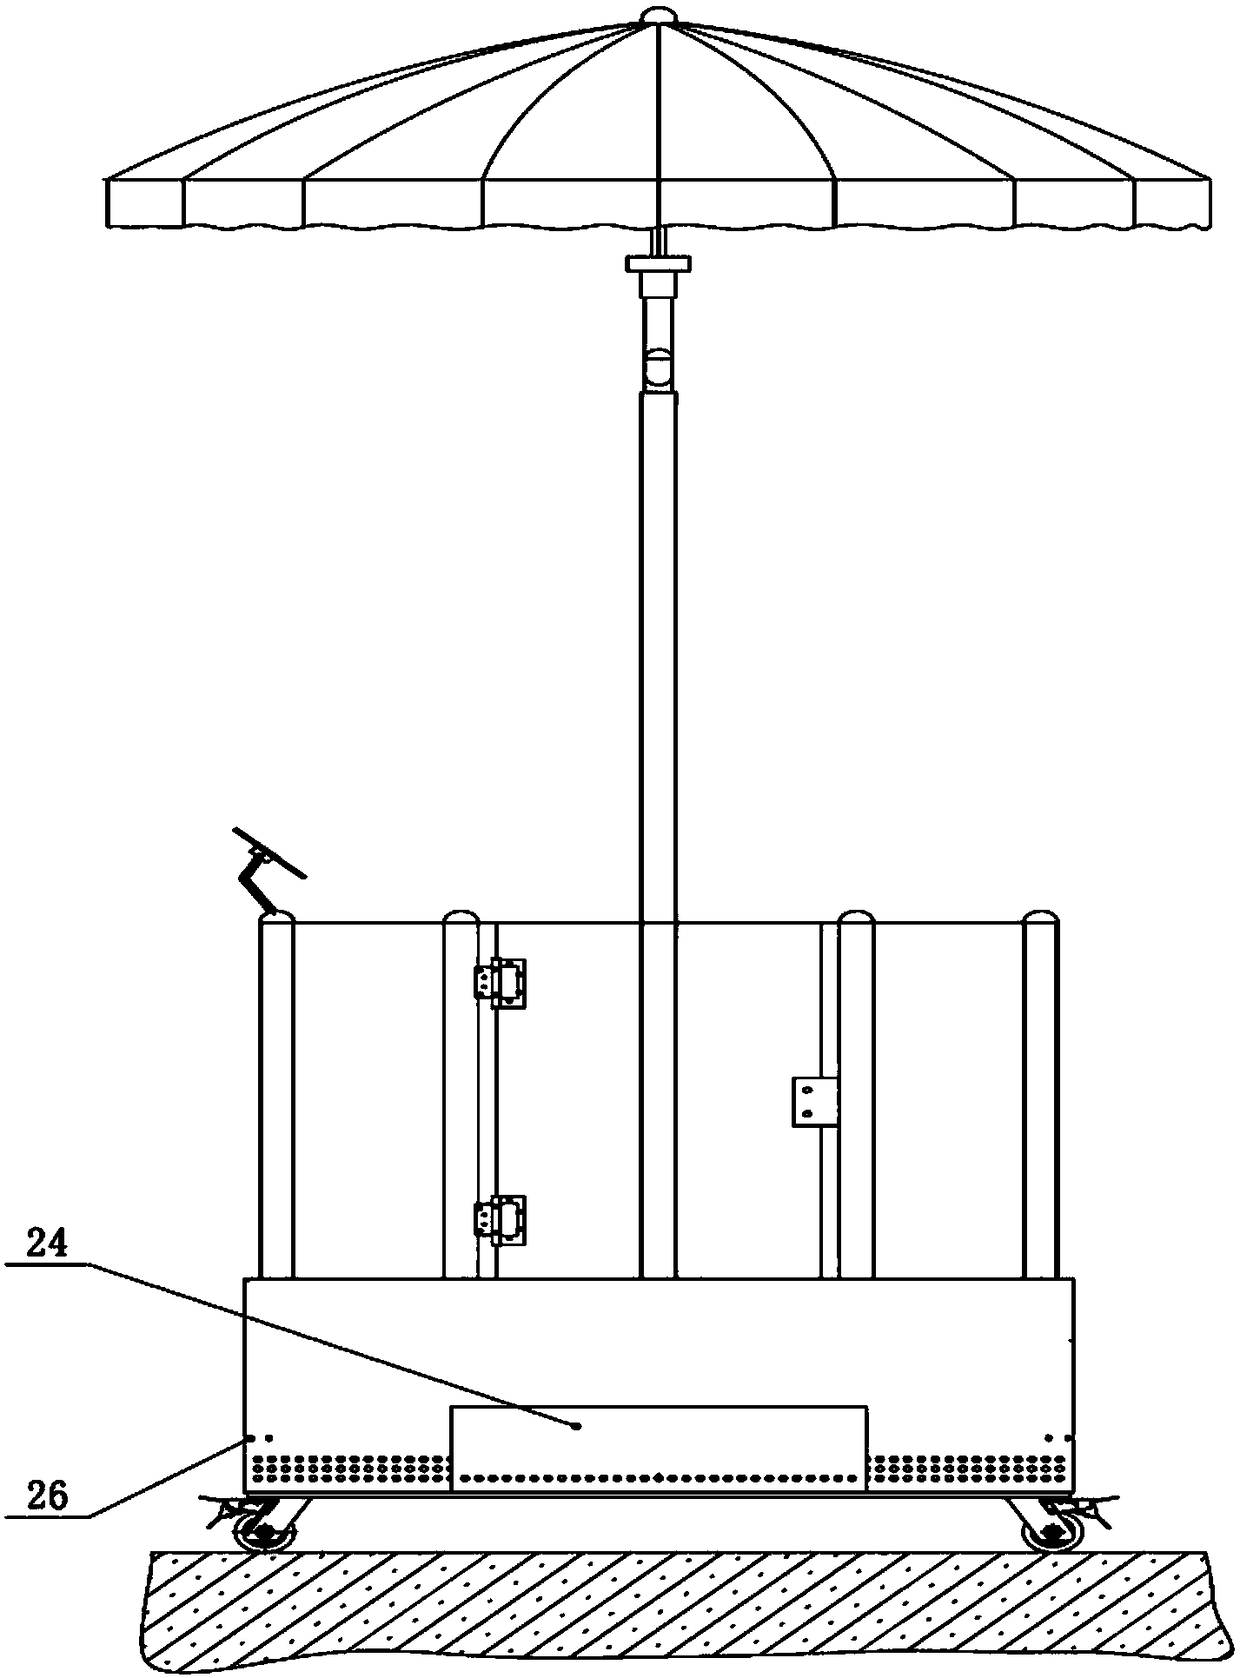 A post equipment and its control method for providing comprehensive protection for outdoor fixed duty posts